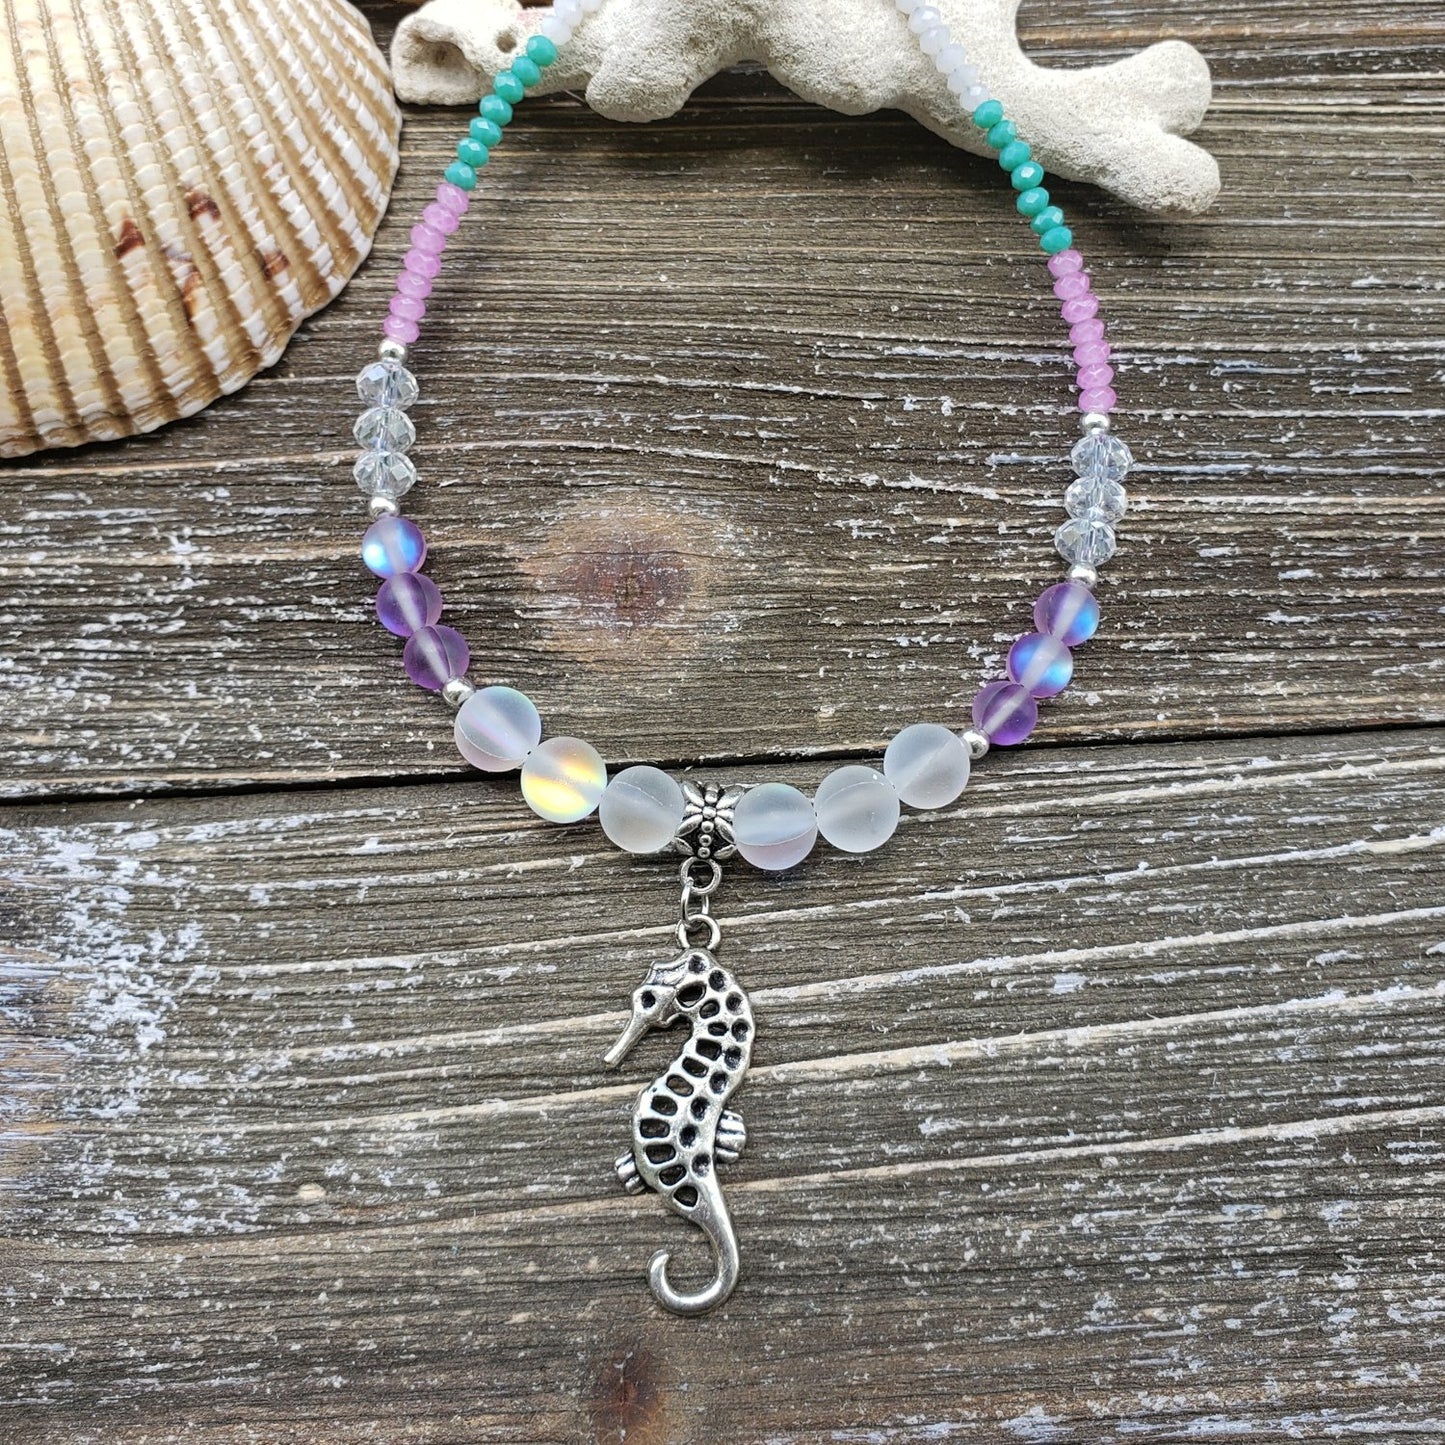 BESHEEK Seahorse BLUE PURPLE WHITE Glass Artisan Beaded Anklet with Extension | Handmade Hypoallergenic Beach Gala Wedding Style Jewelry